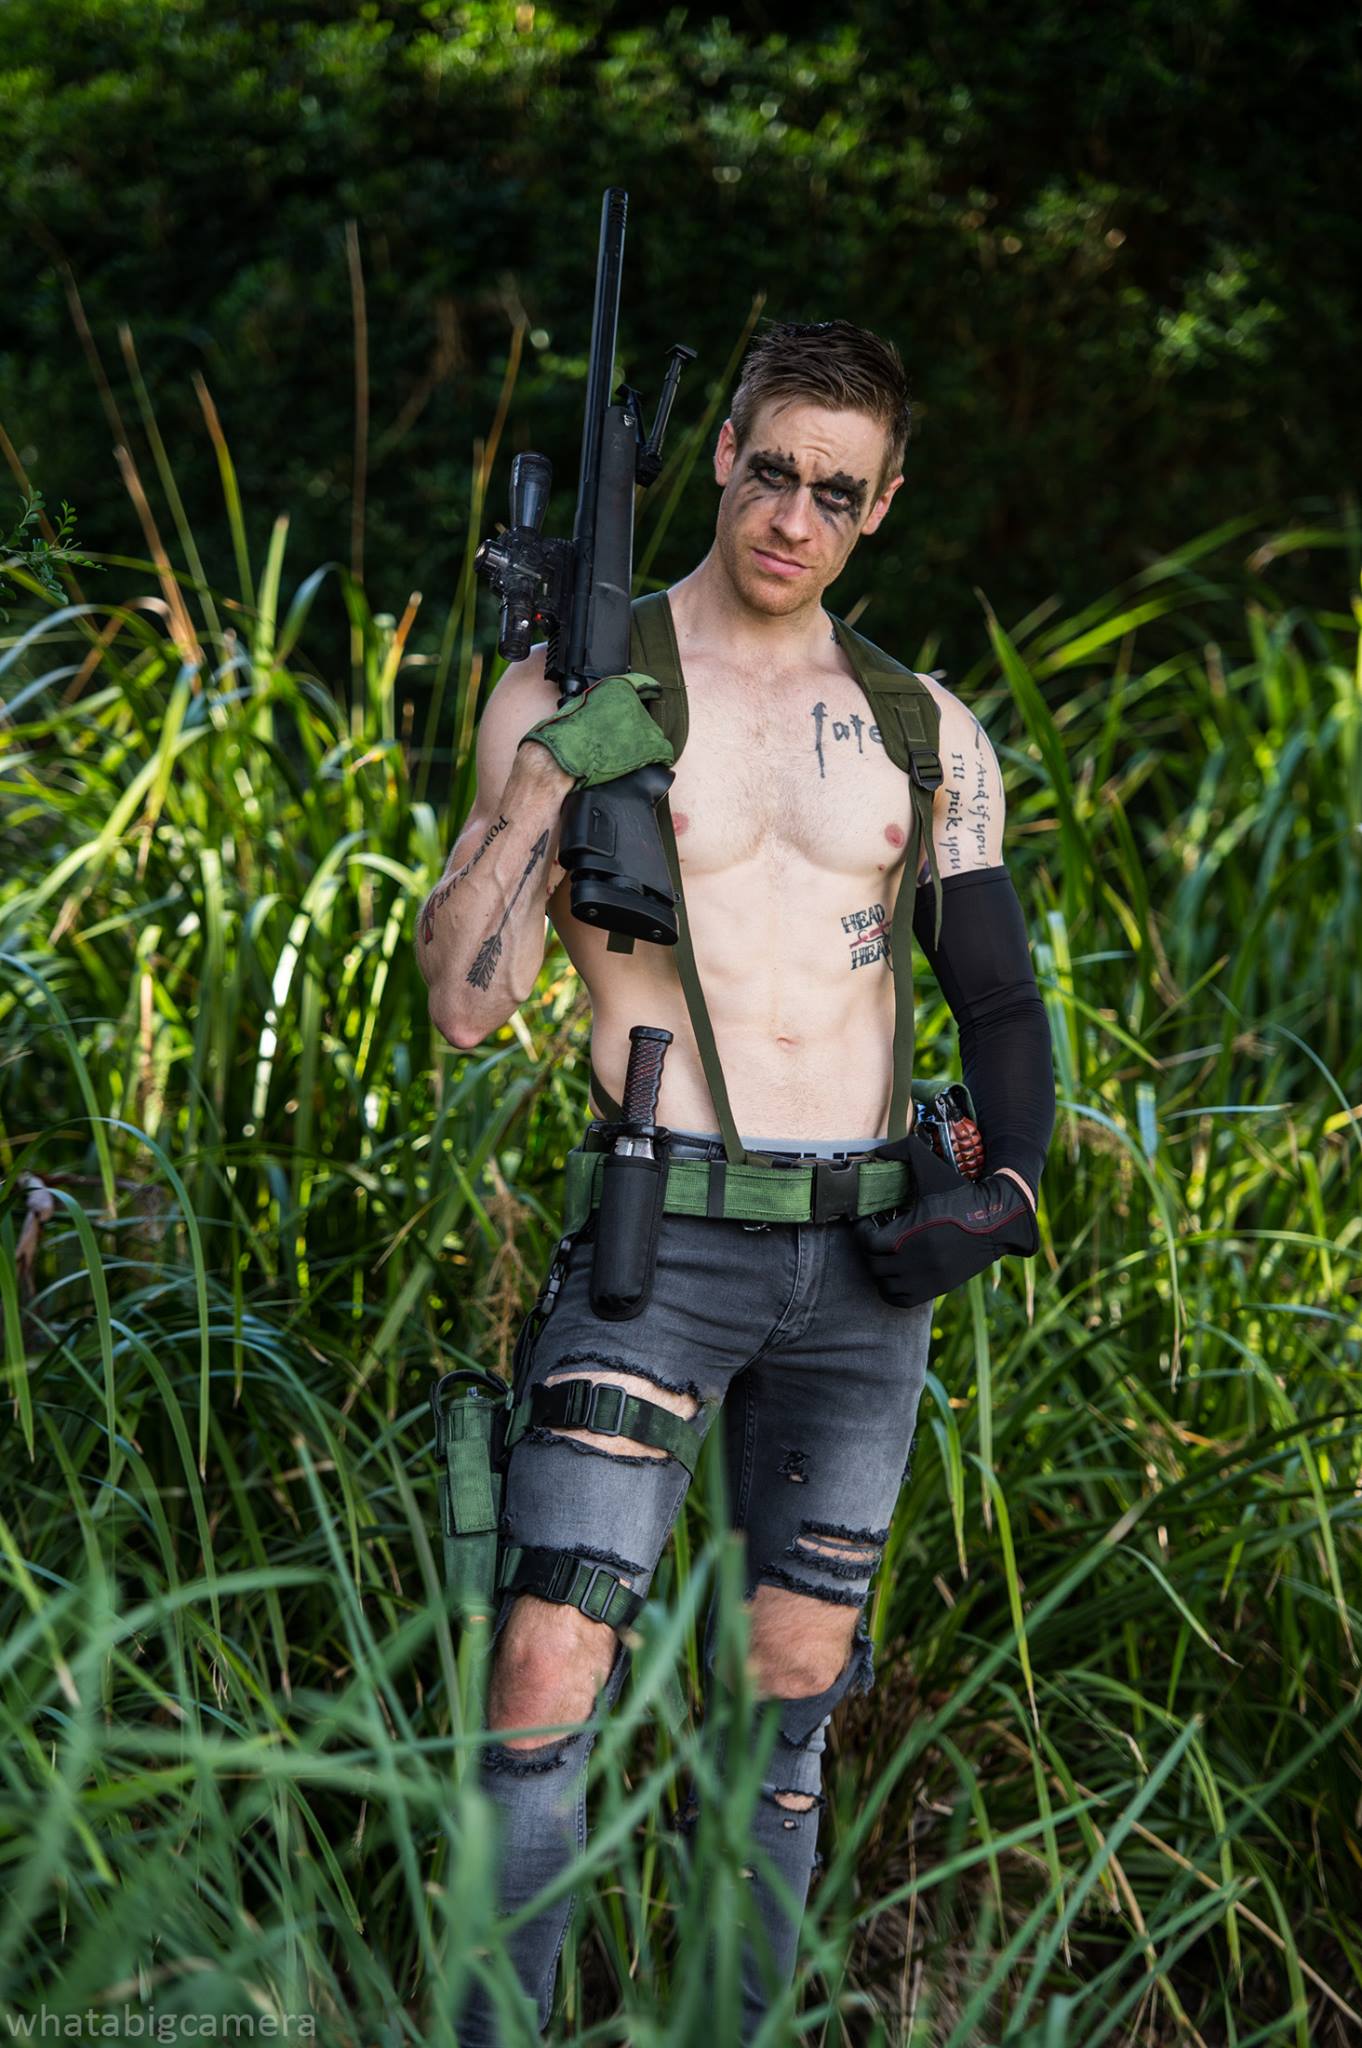 A Different Kind Of Sexy Metal Gear Cosplay